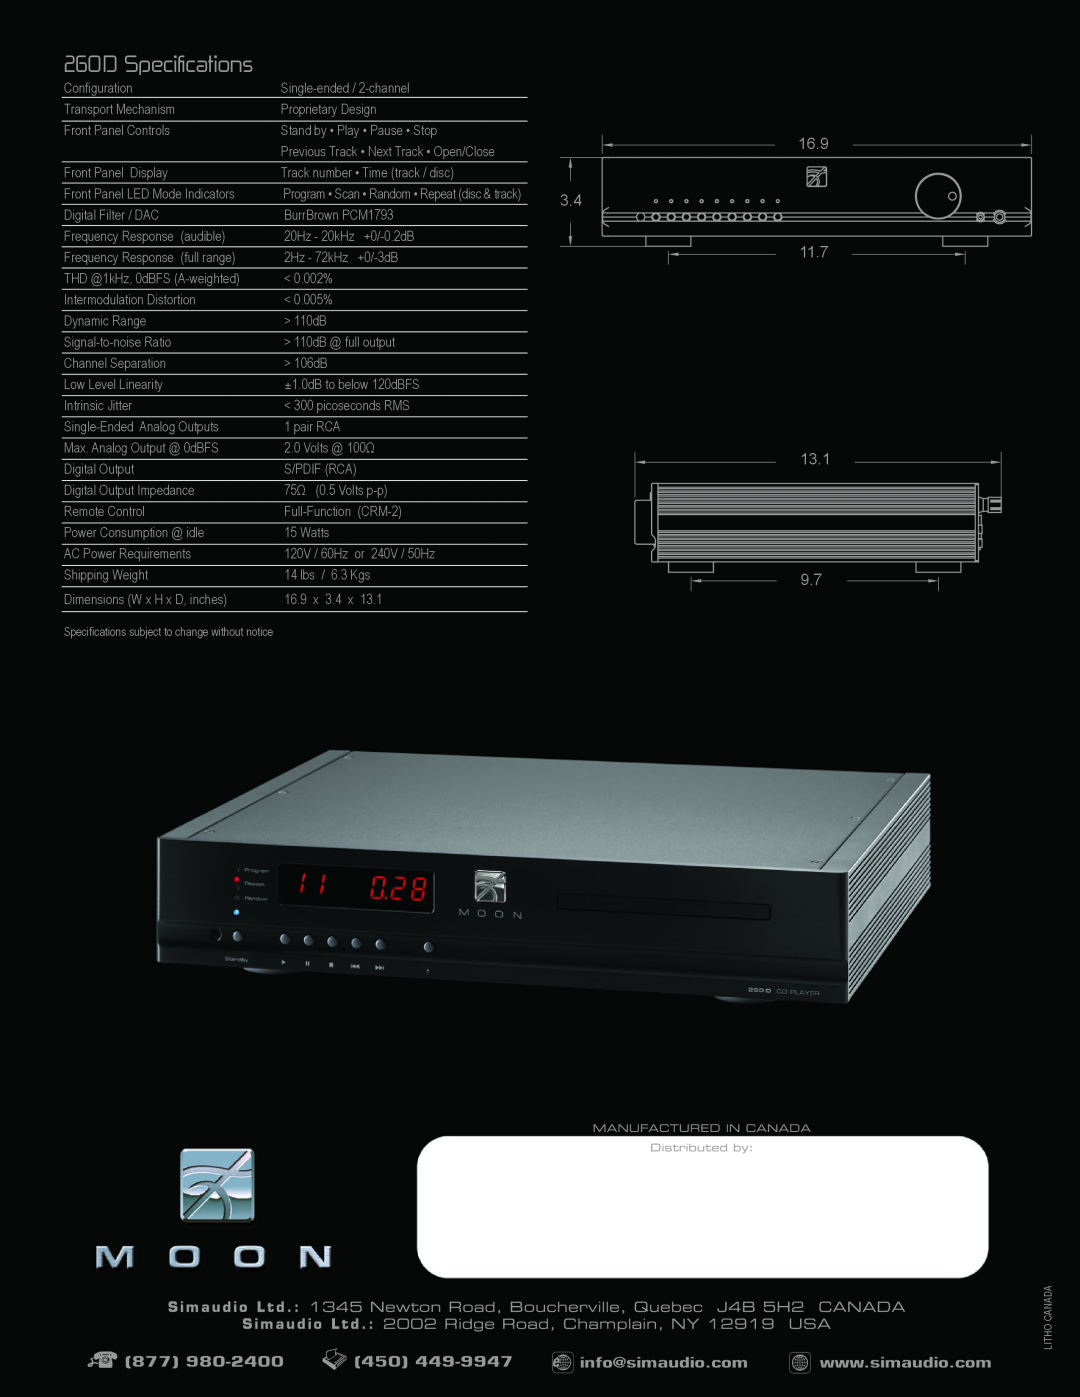 Simaudio manual 260D Specifications, 16.9 